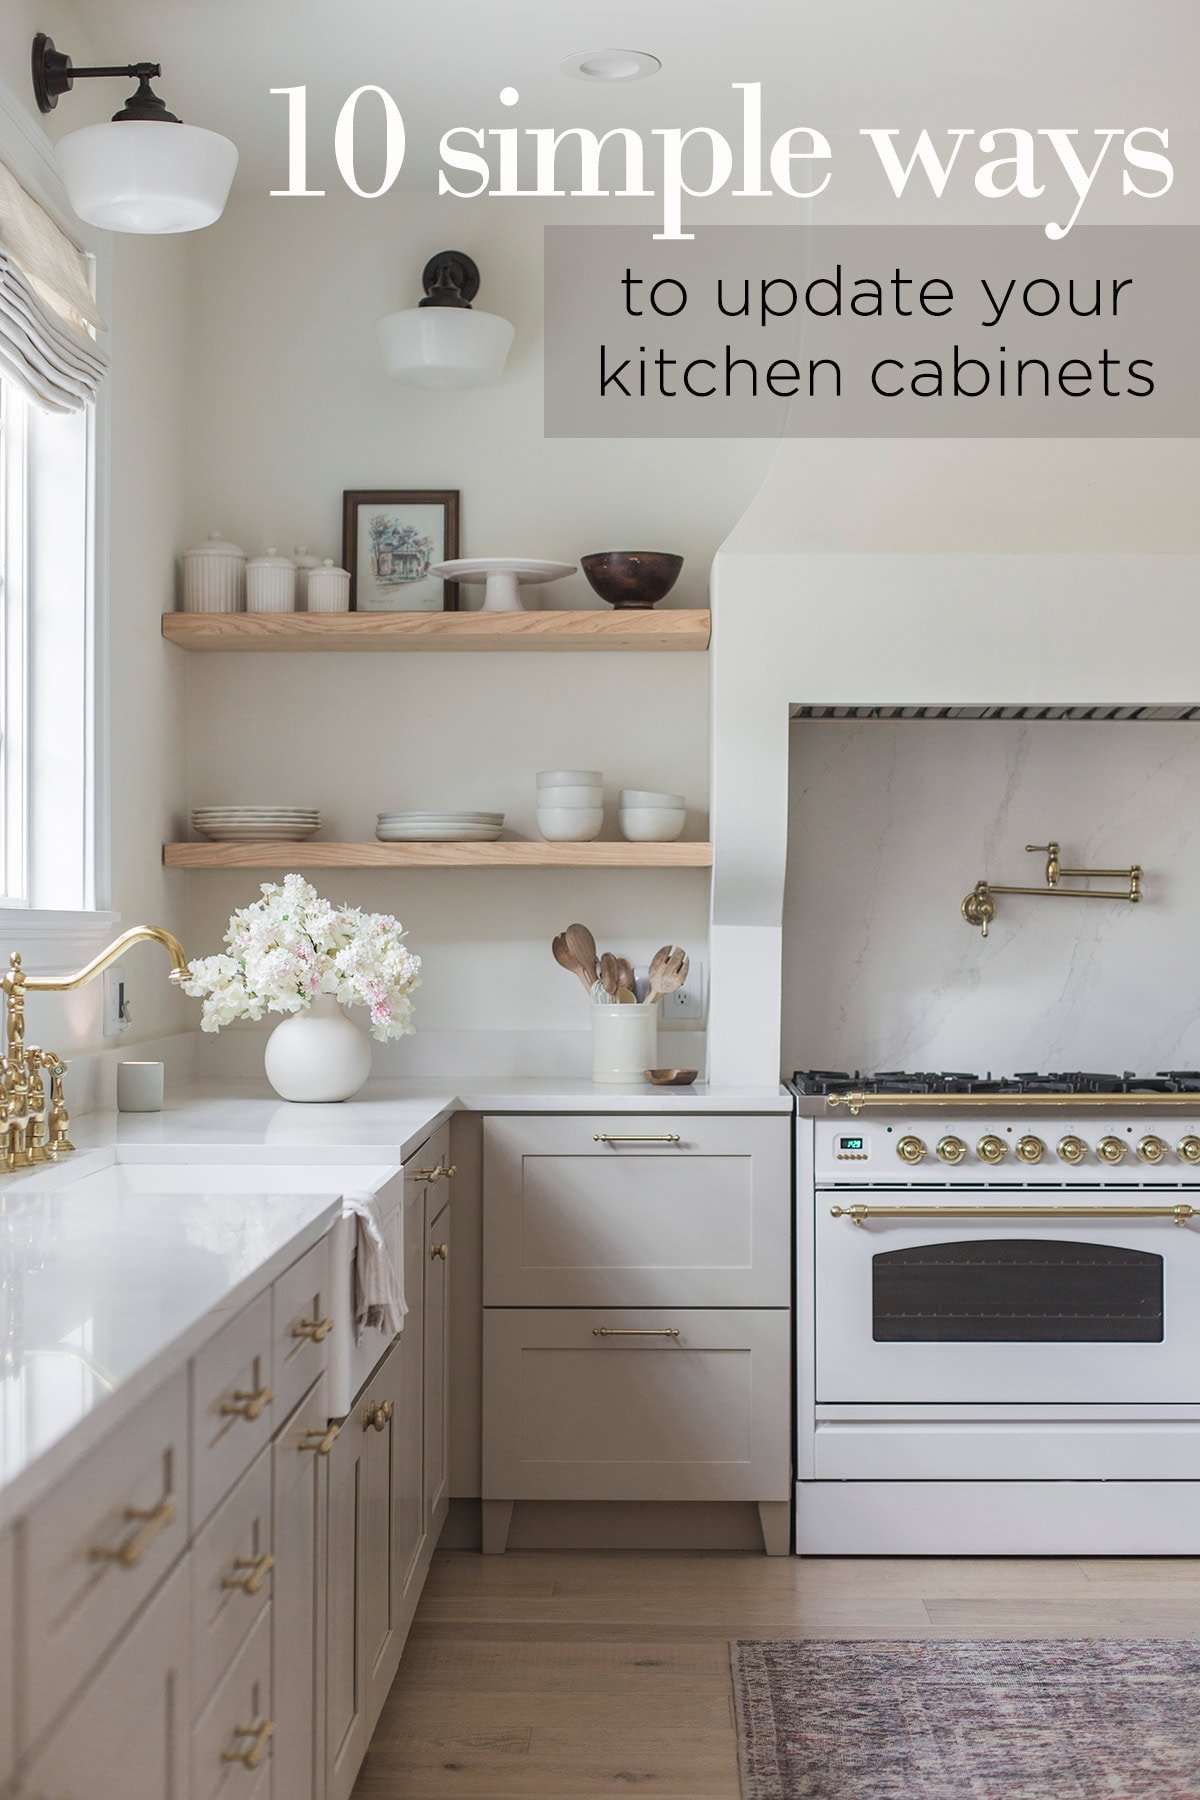 Paint Kitchen Cabinets: Transform Your Space with a Fresh Coat!